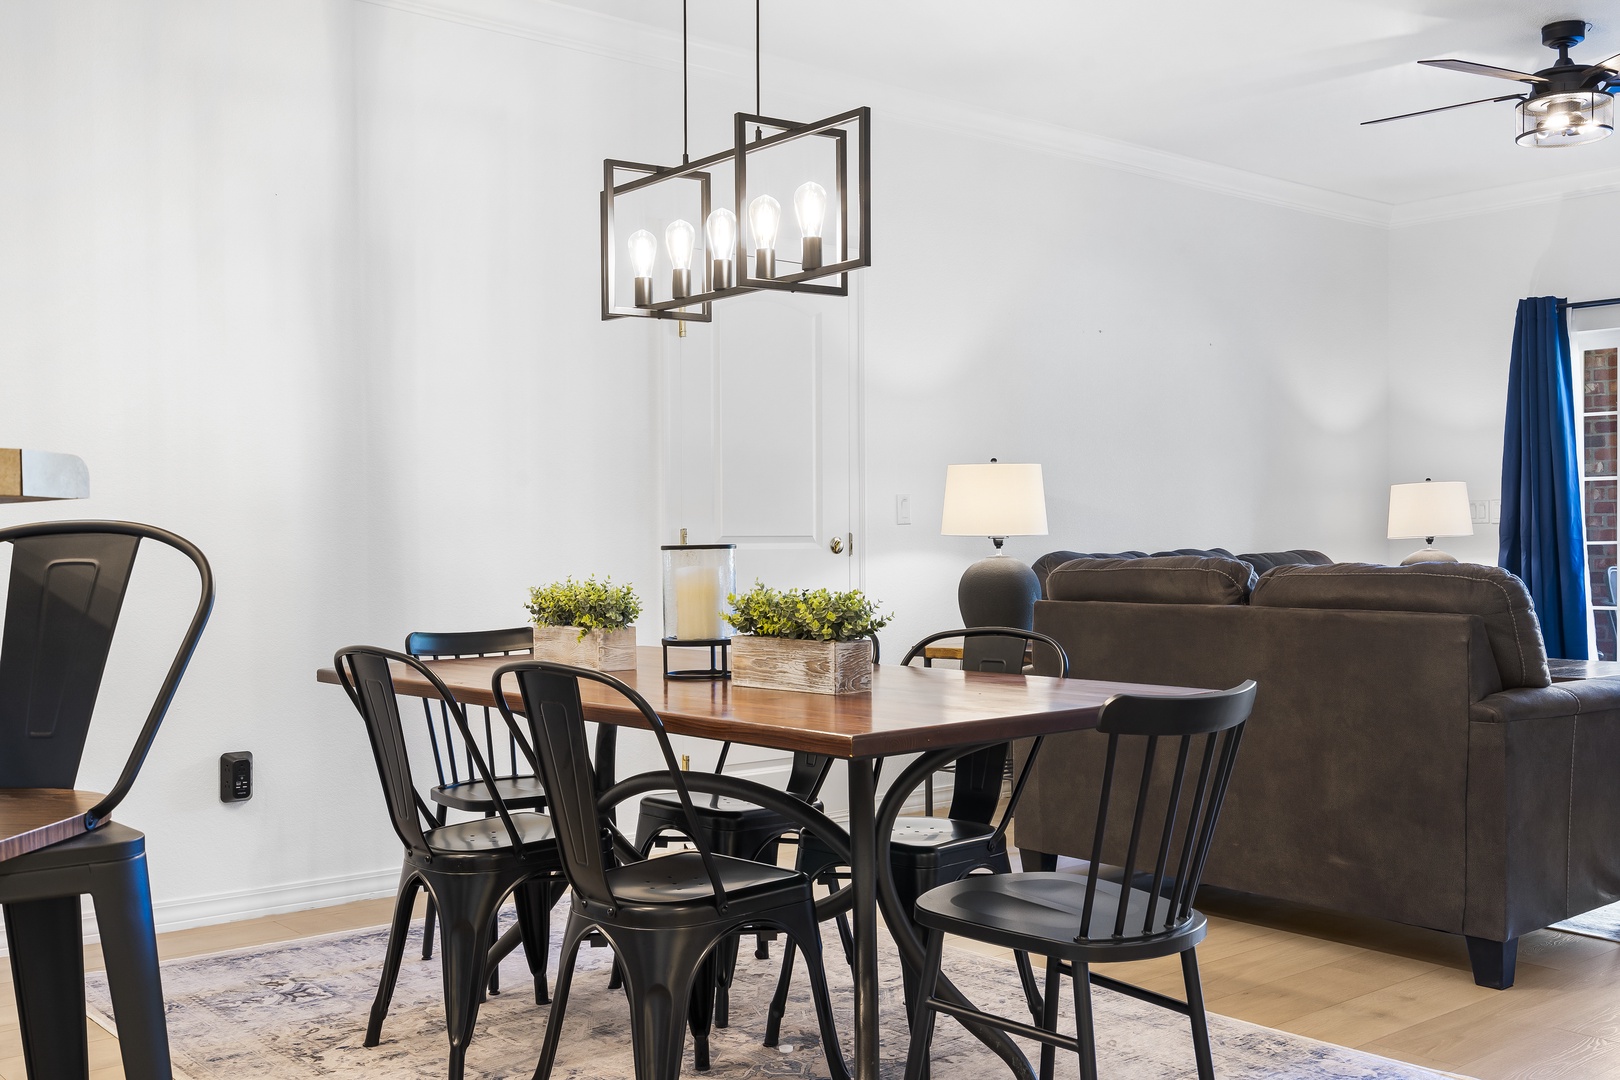 Peaceful dining room seating for 6